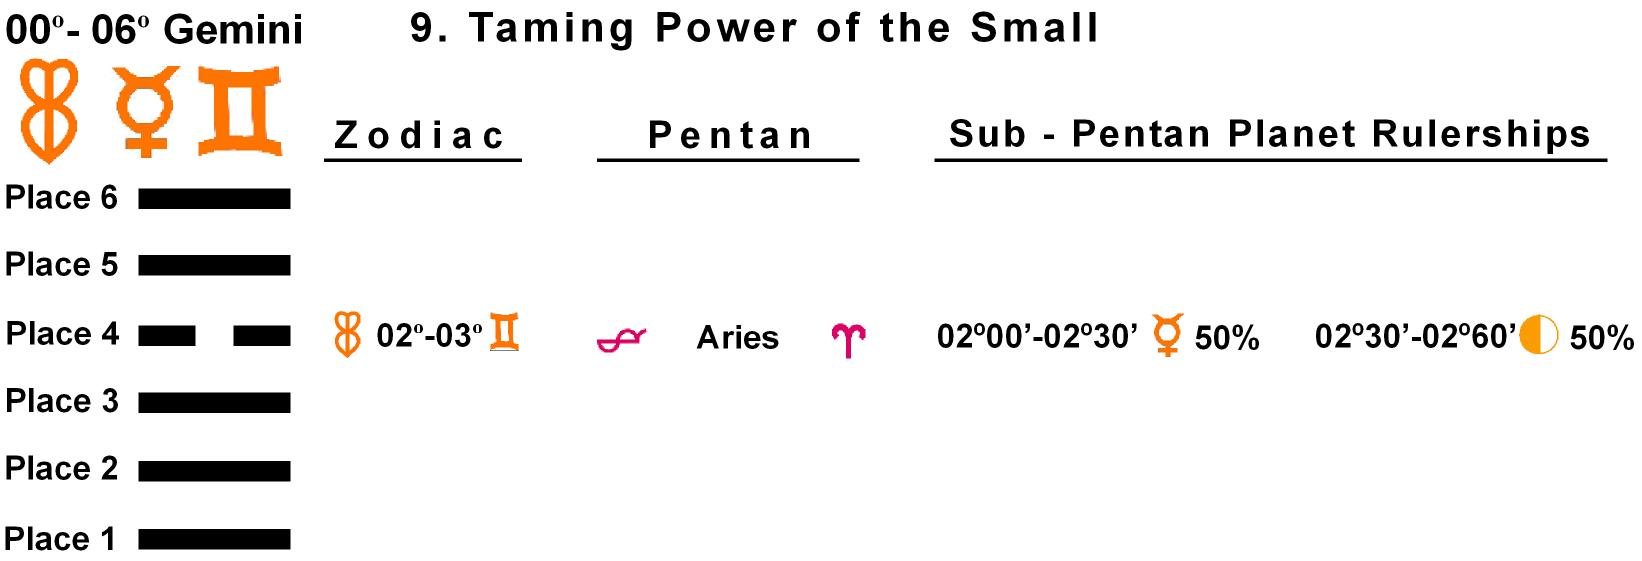 Pent-lines-03GE 02-03 Hx-09 Taming Power Of The Small